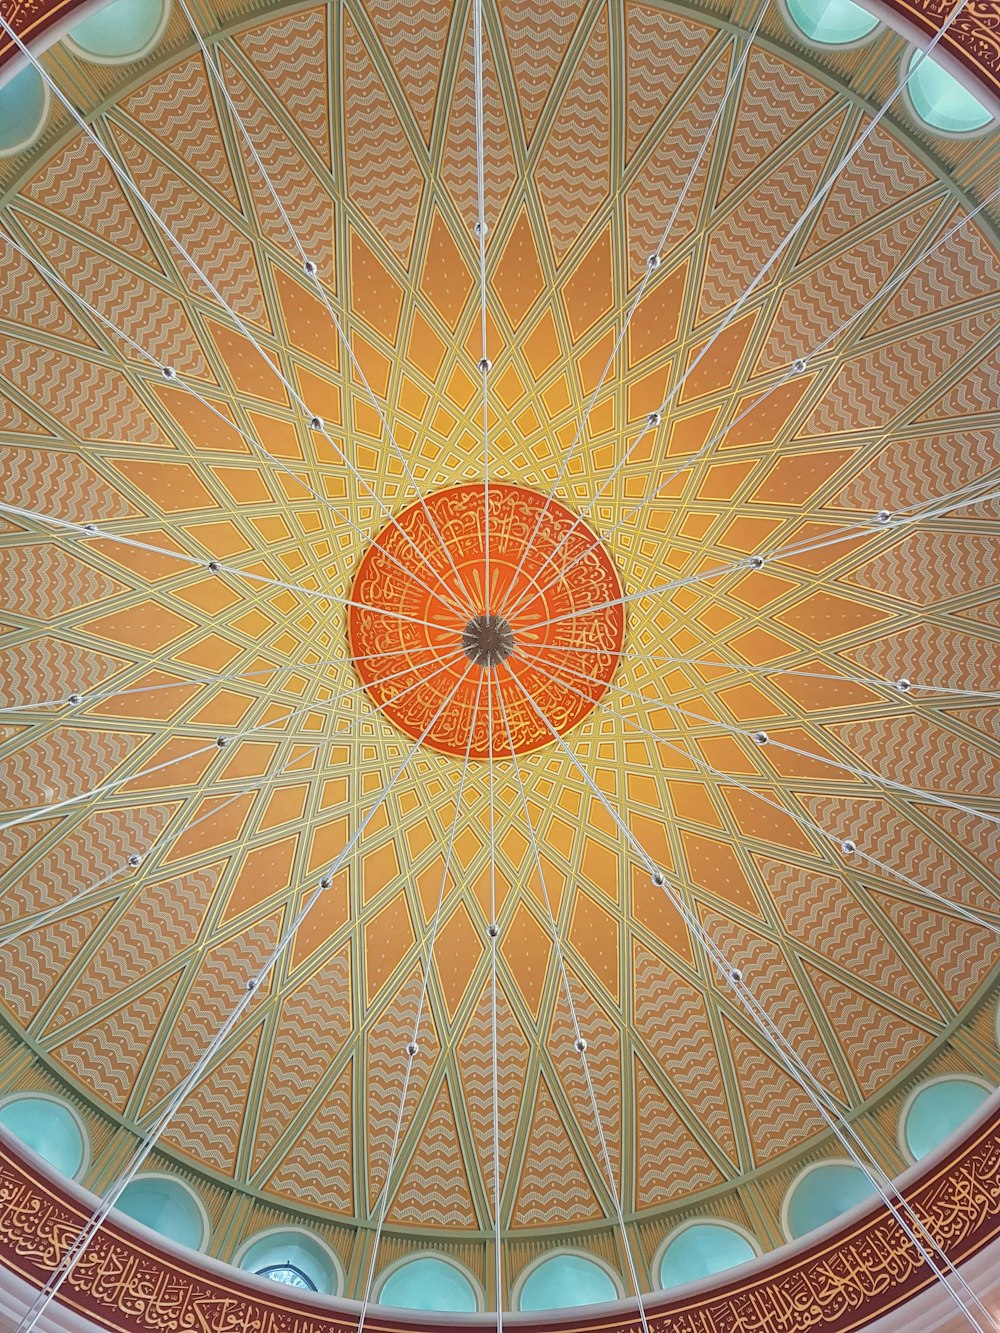 the ceiling of a building has a circular design